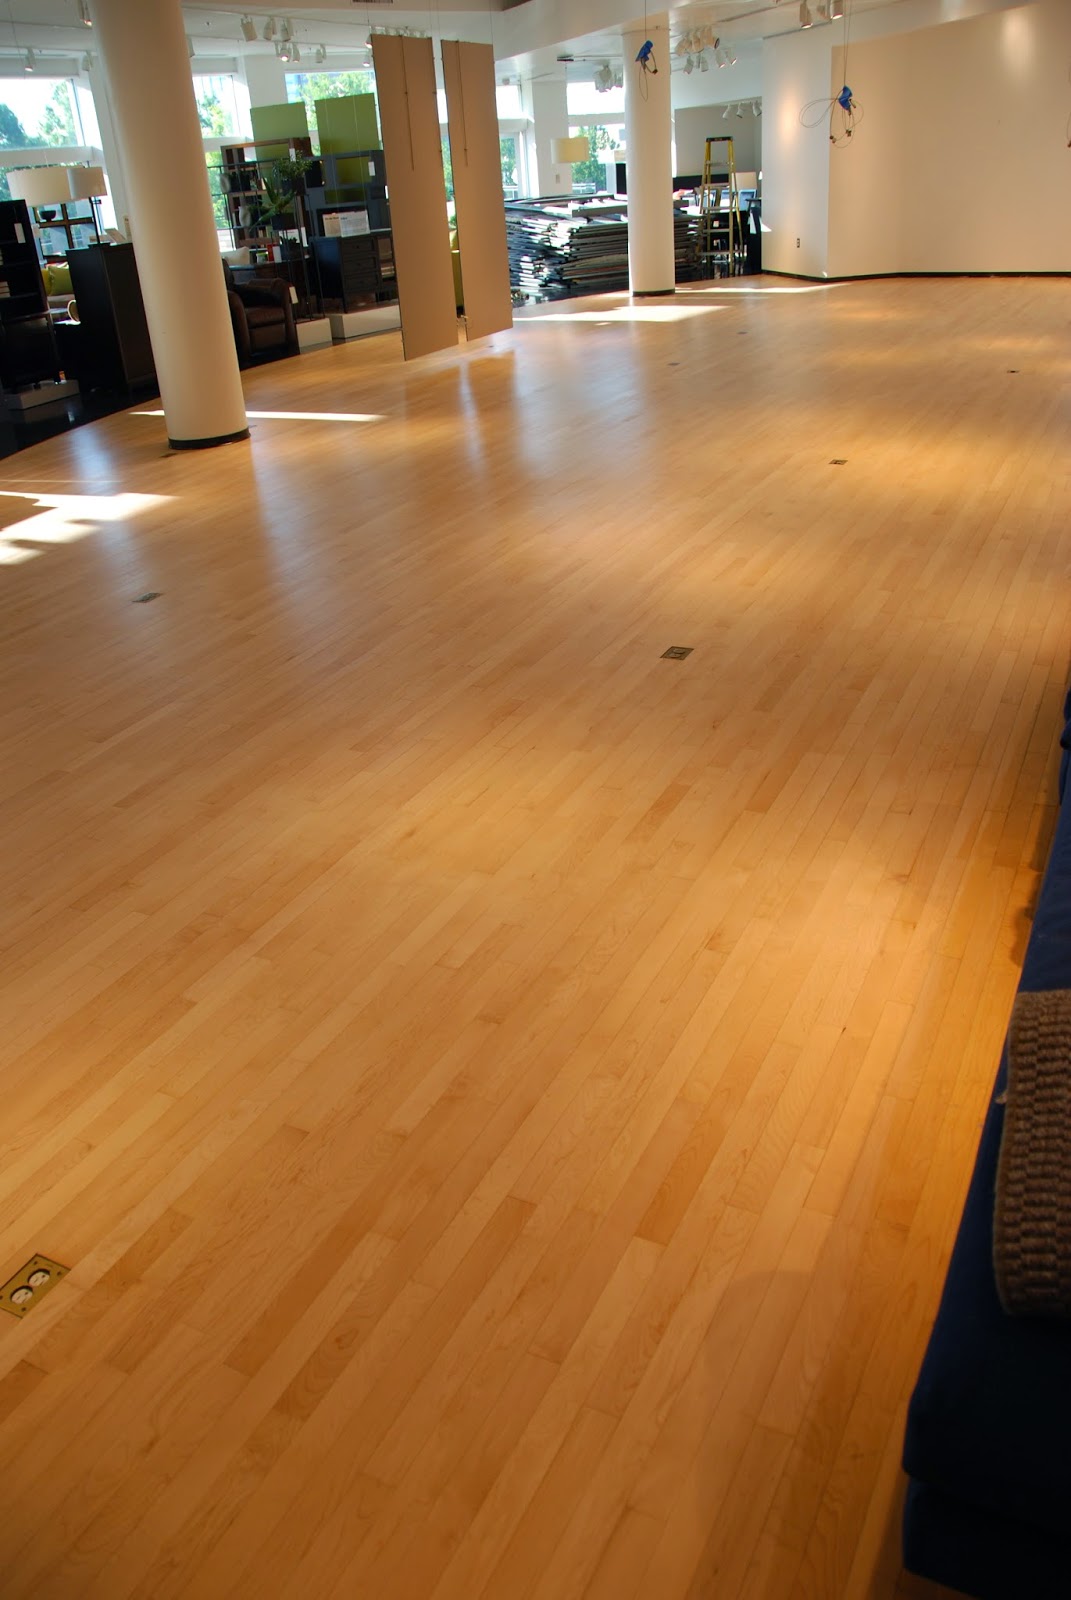 American Ultraviolet Uv Finishes Flooring Quickly And Efficiently